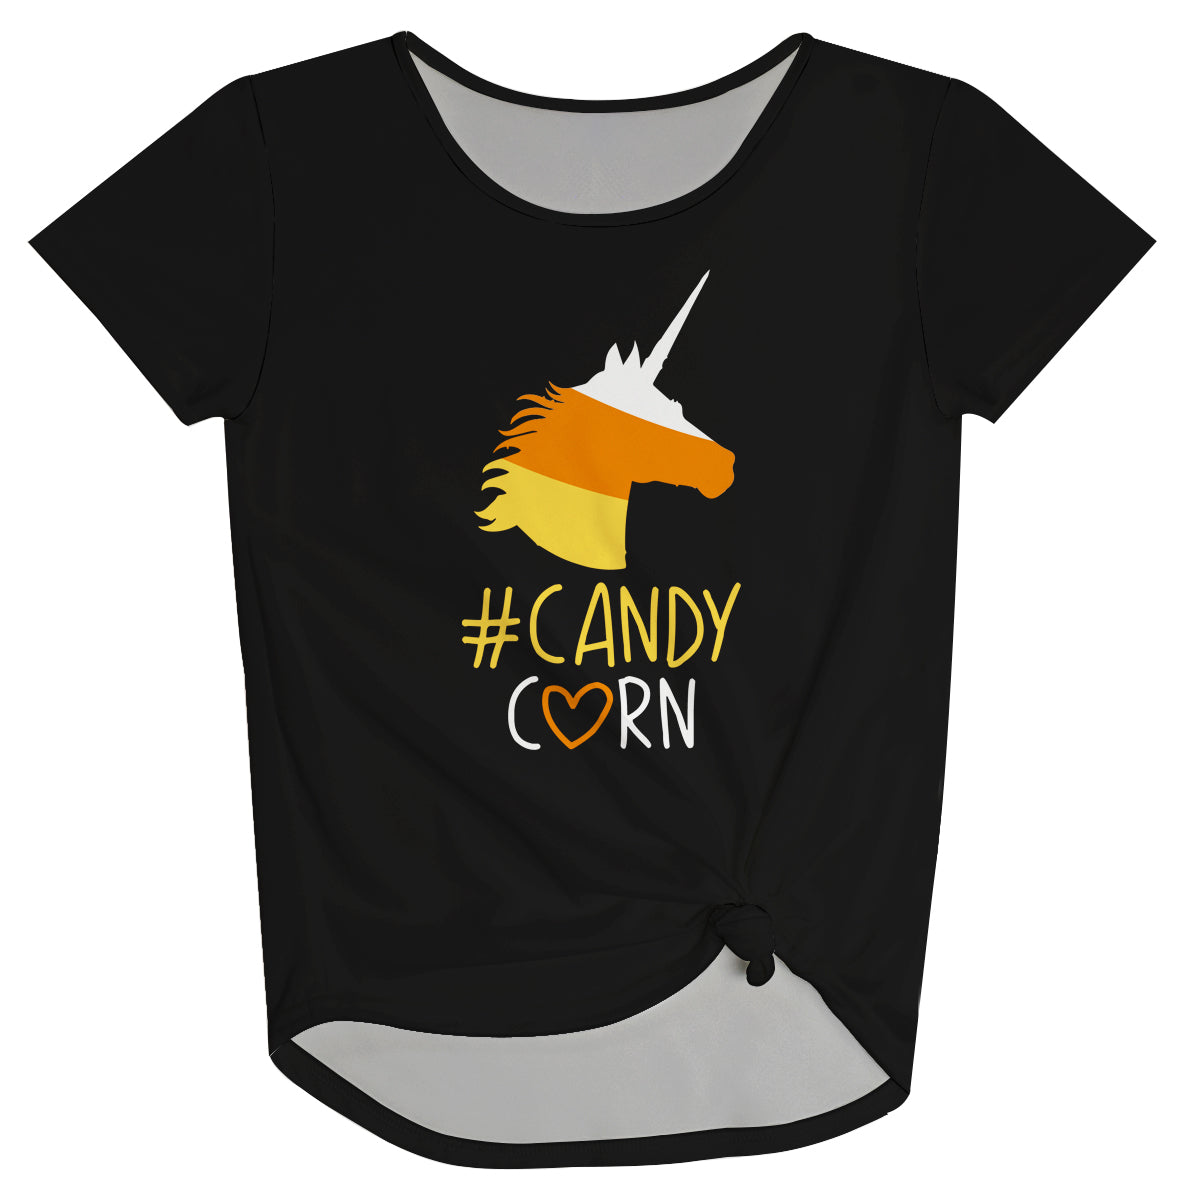 Girls black and yellow candy corn blouse - Wimziy&Co.